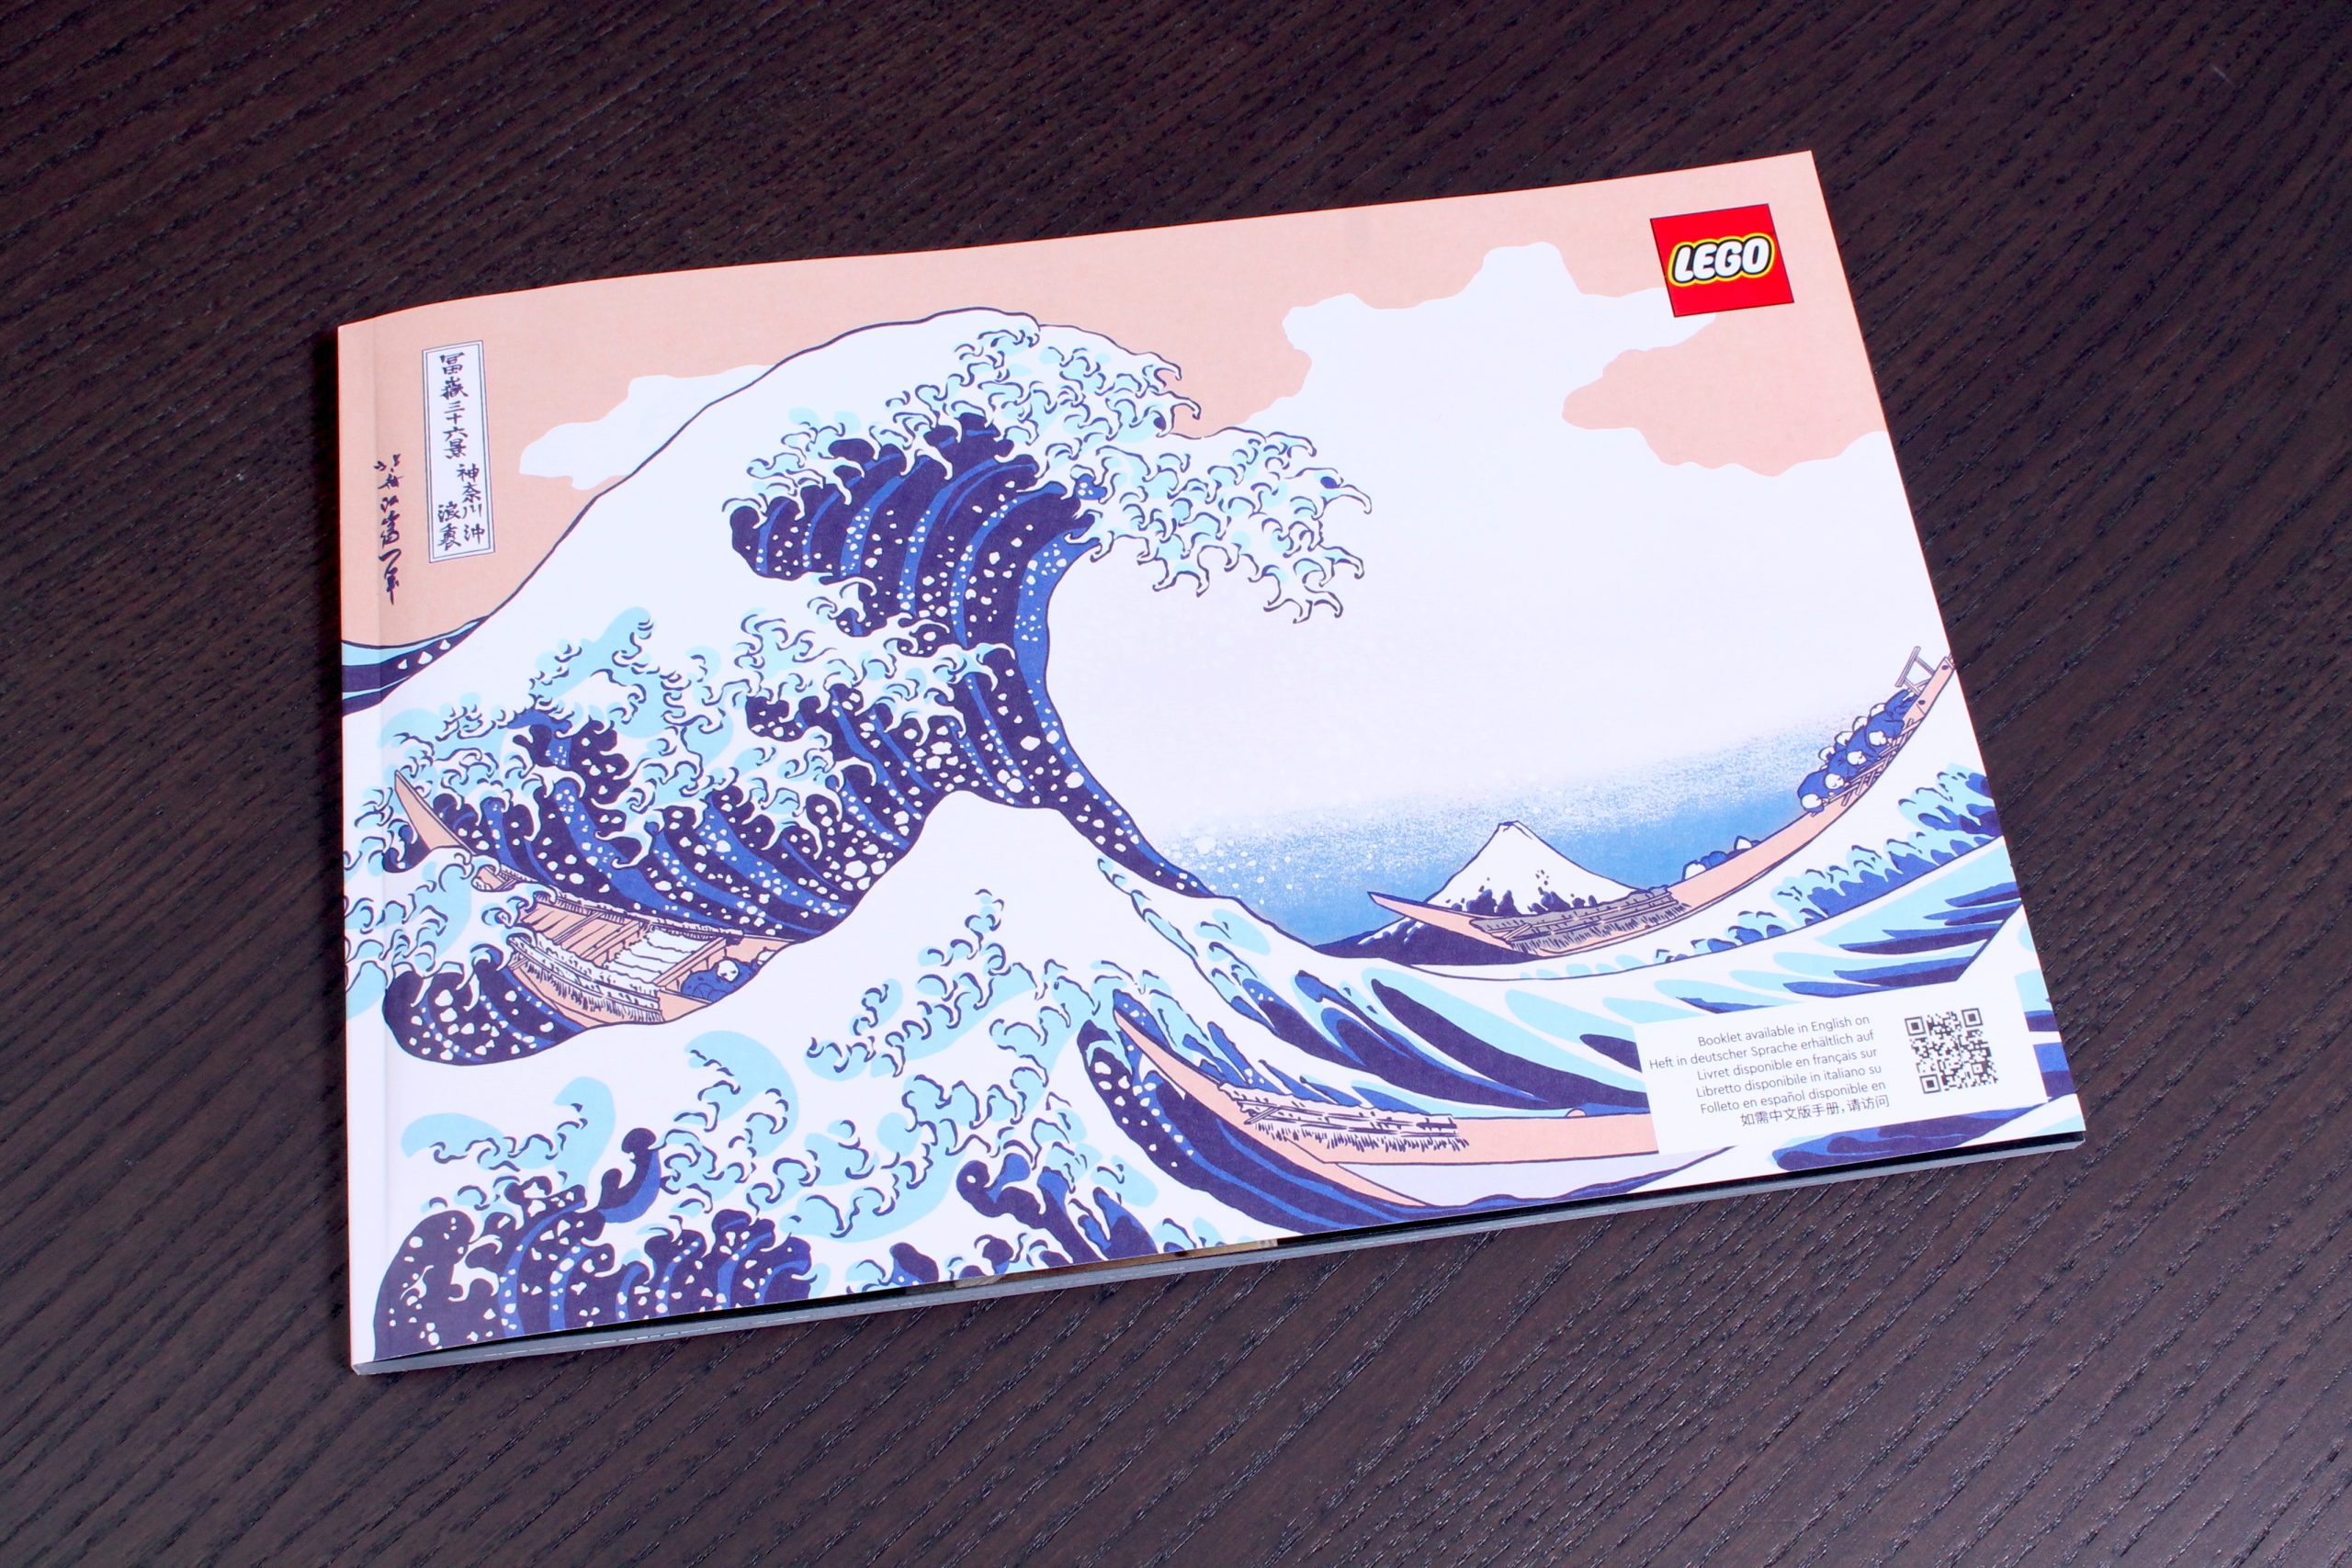 LEGO Art  Hokusai: The Great Wave review and gallery